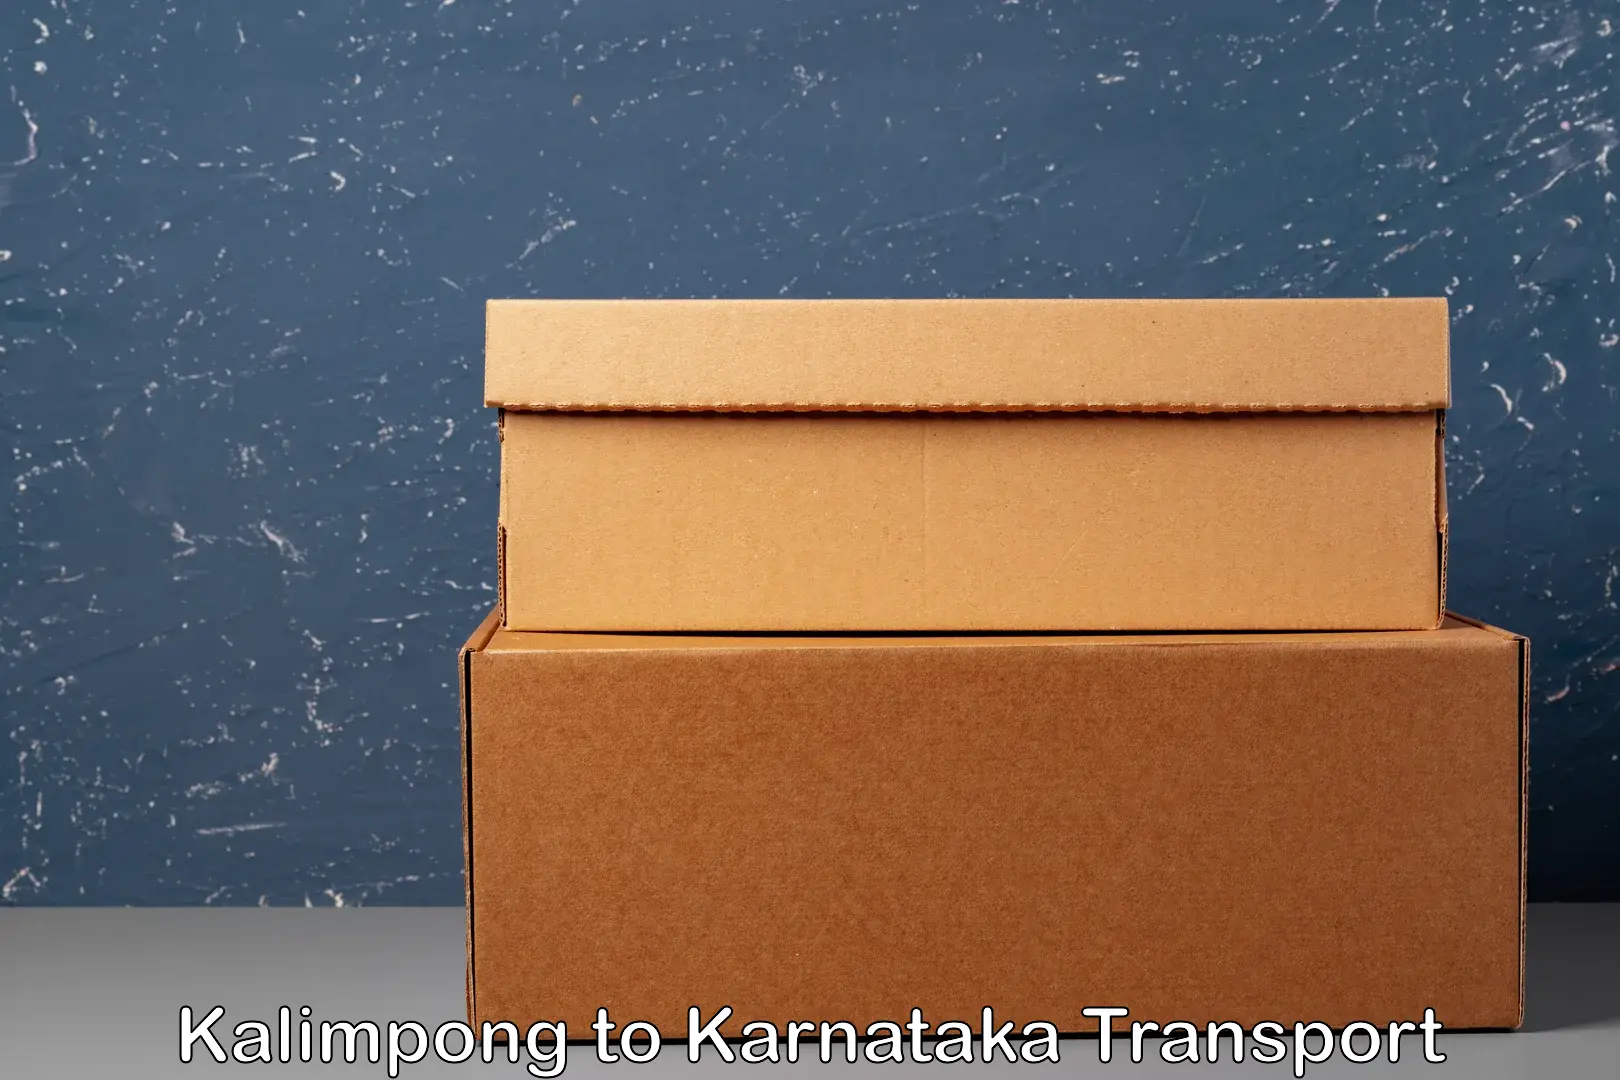 Truck transport companies in India Kalimpong to Nagamangala